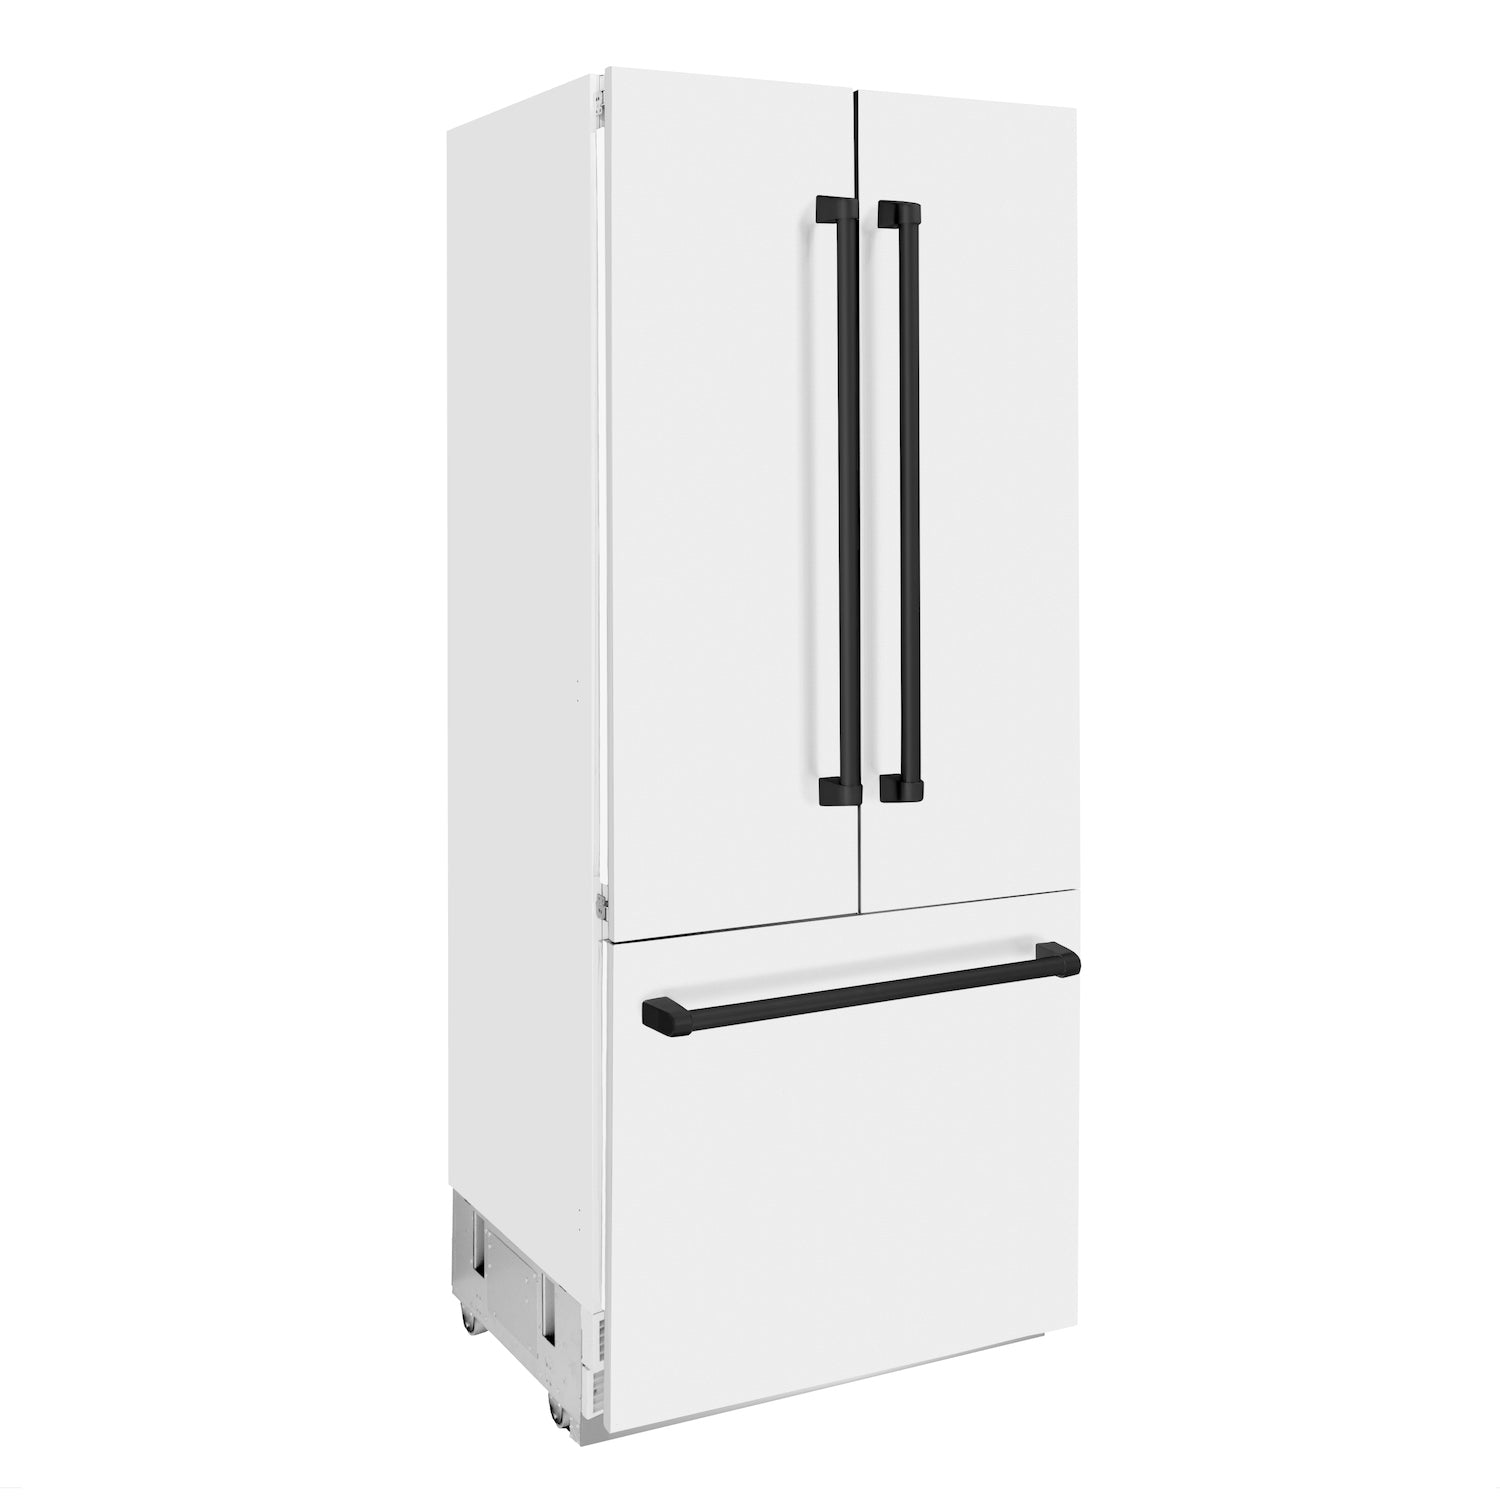 ZLINE 36" Autograph Edition Built-in French Door Refrigerator with White Matte panels and accent handles side.